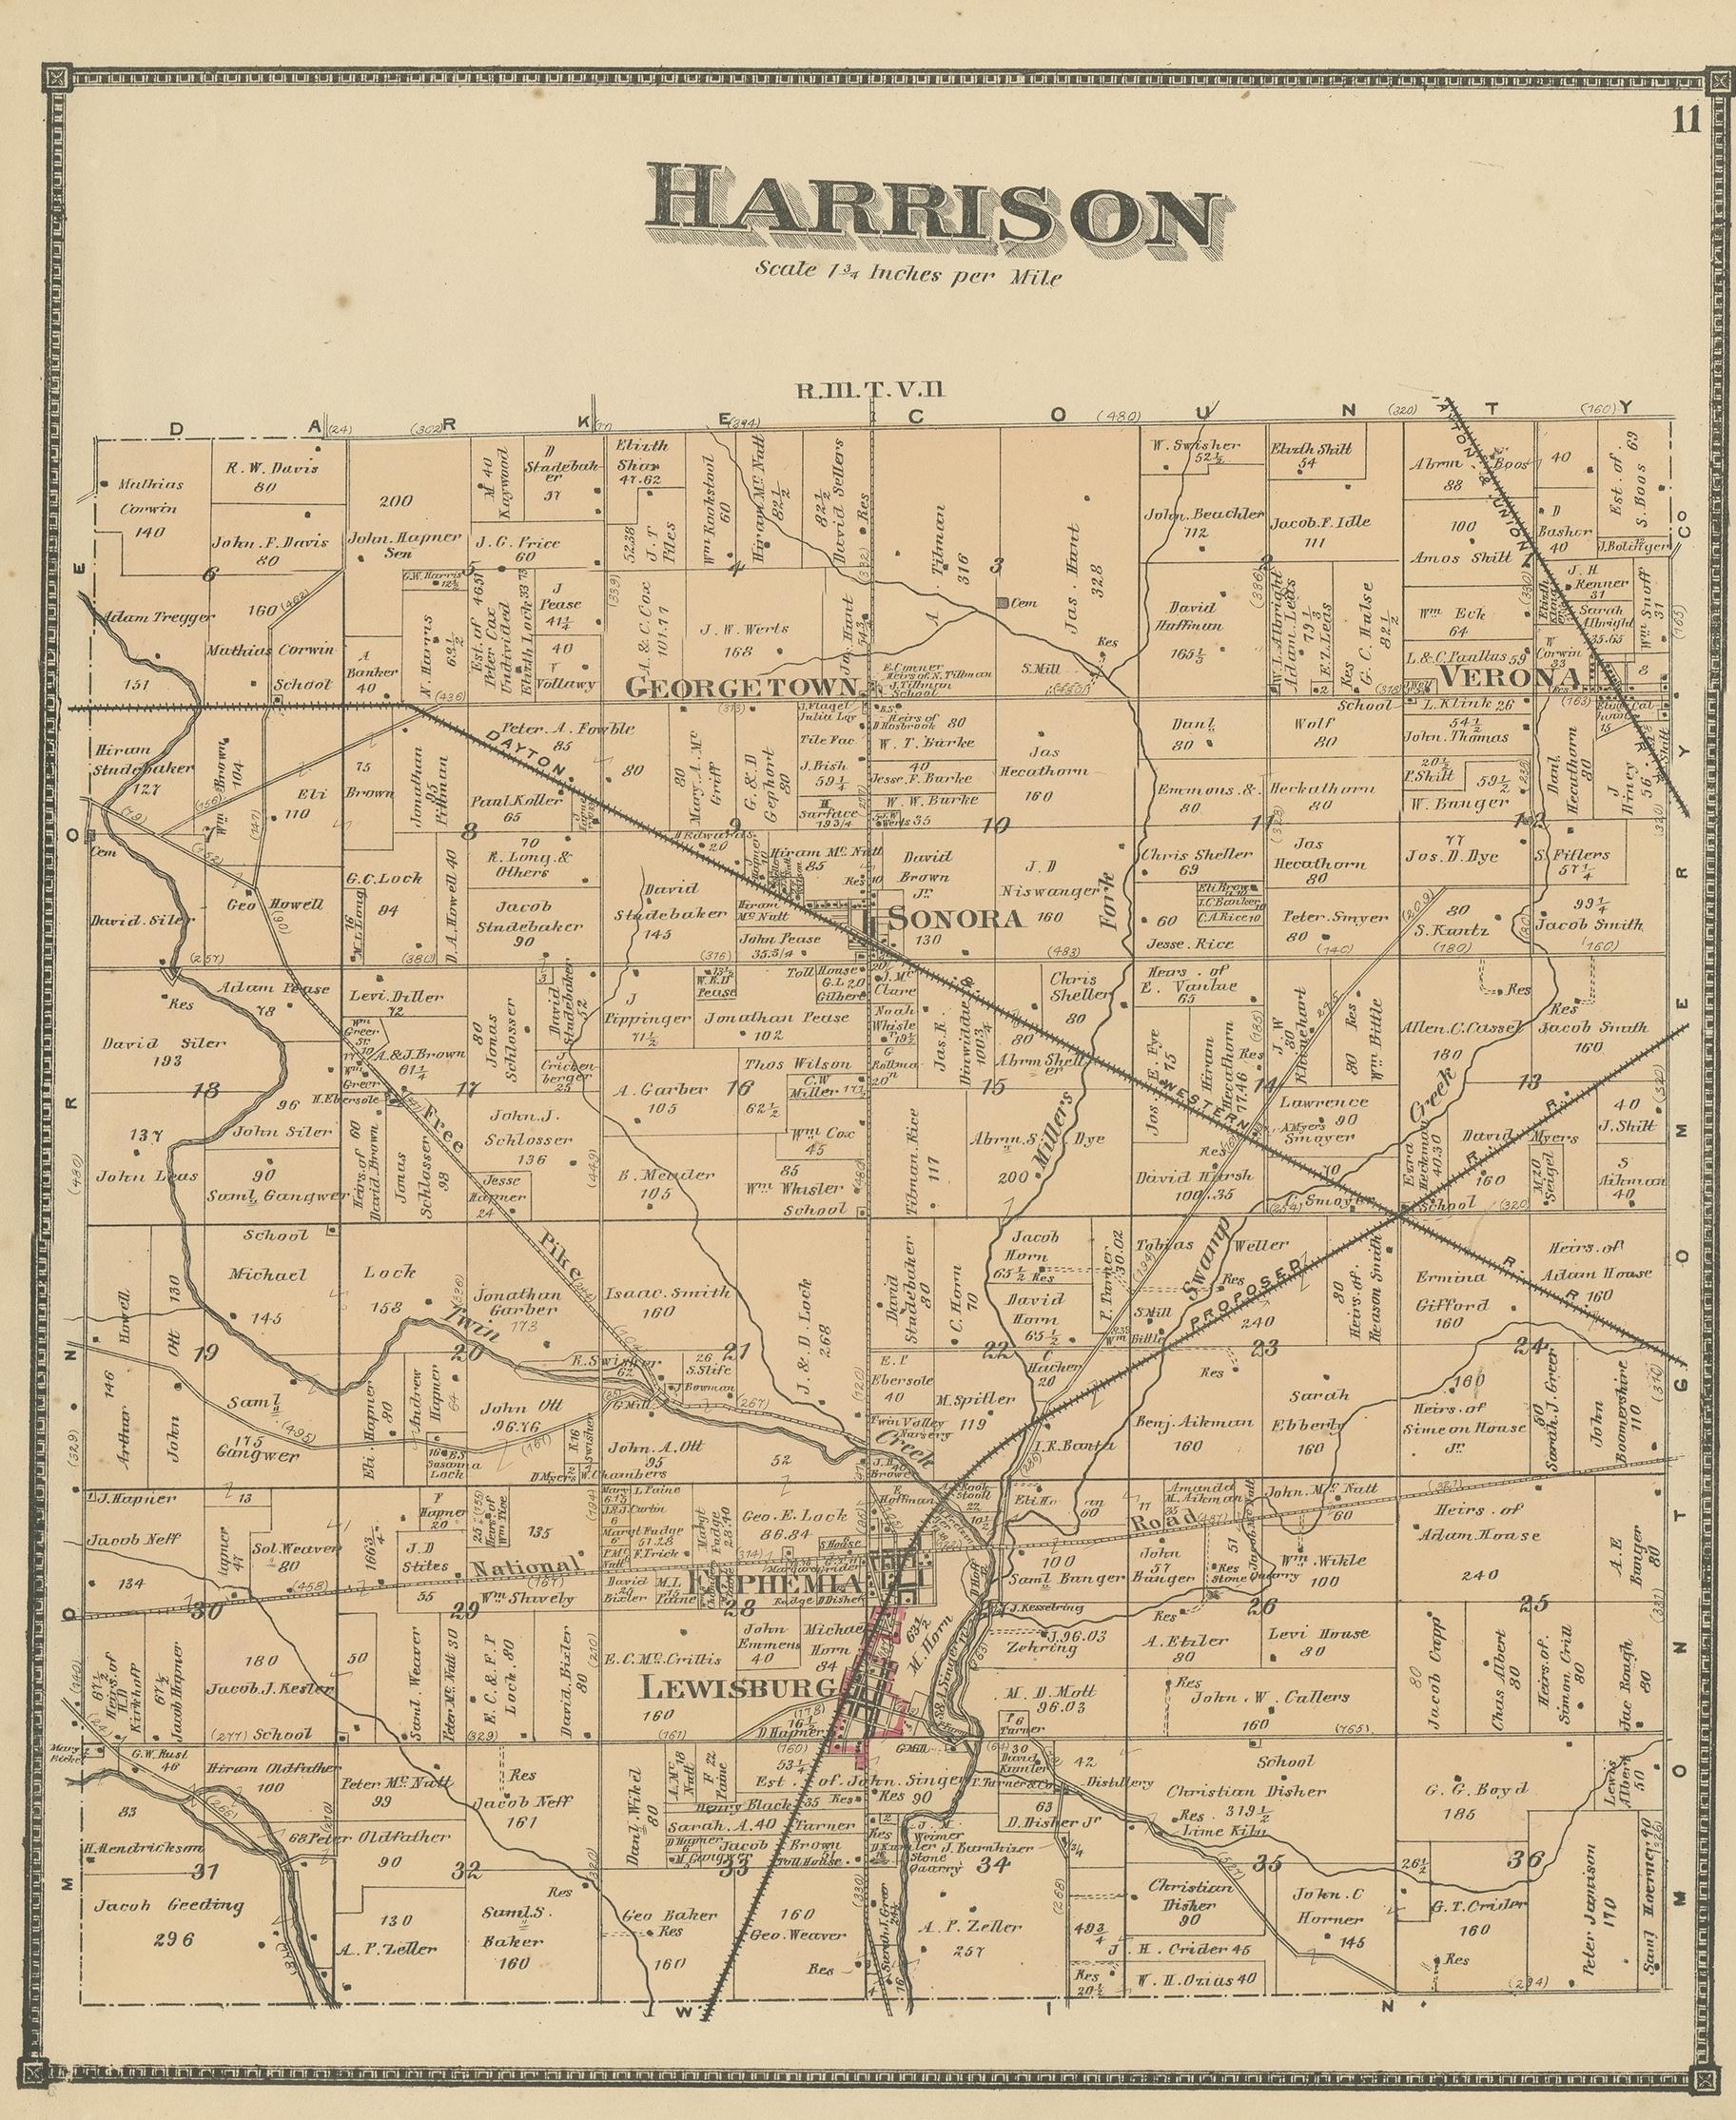 Antique map titled 'Harrison'. Original antique map of Harrison, Ohio. This map originates from 'Atlas of Preble County Ohio' by C.O. Titus. Published, 1871.